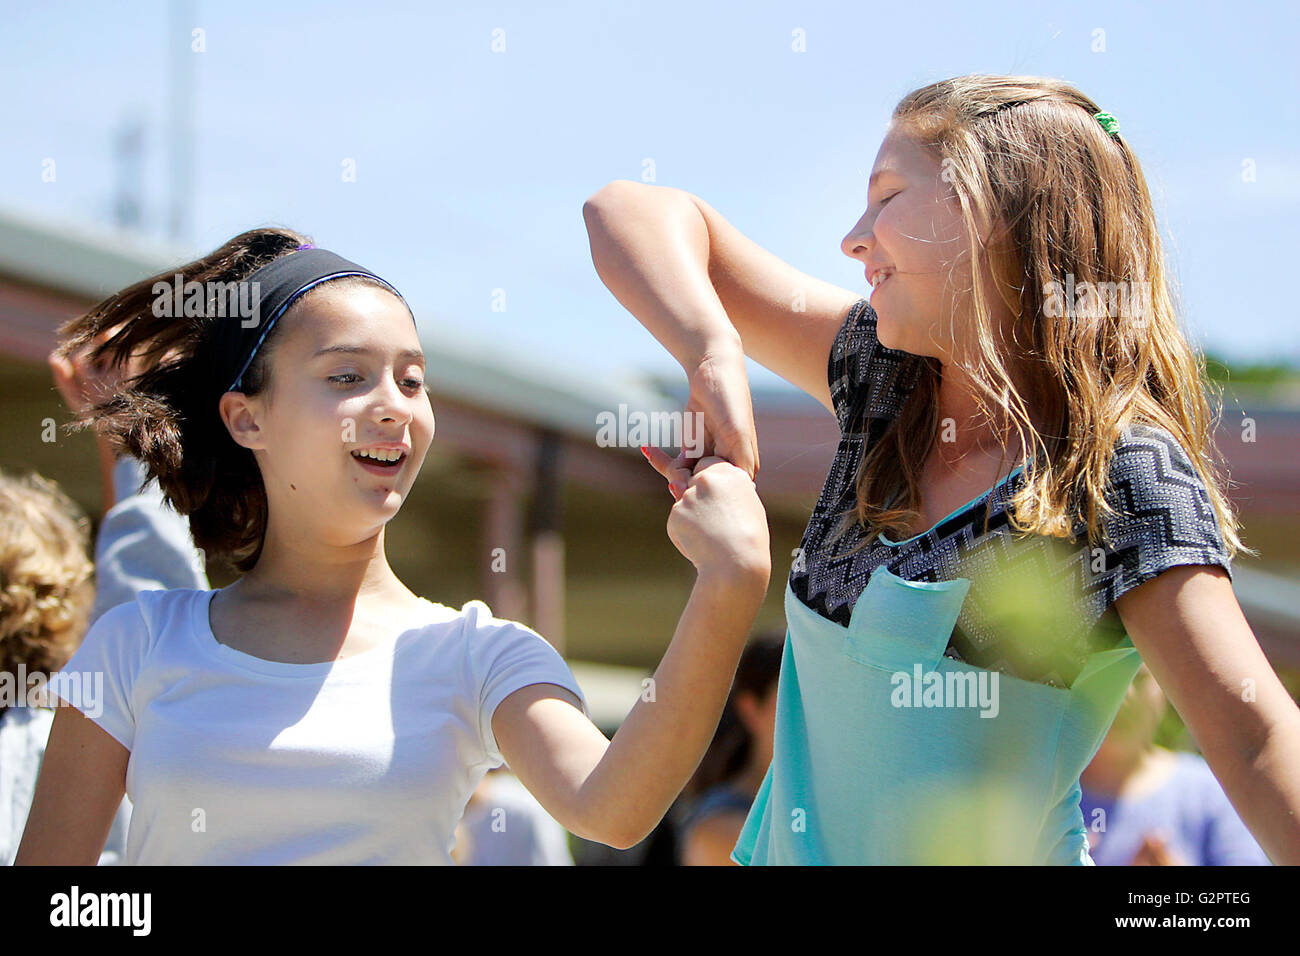 Napa, CA, USA. 1st June, 2016. River School students Sophie Lair, left, and Shelby Morse dance in the River Courtyard at the school's first International Festival on Wednesday. © Napa Valley Register/ZUMA Wire/Alamy Live News Stock Photo